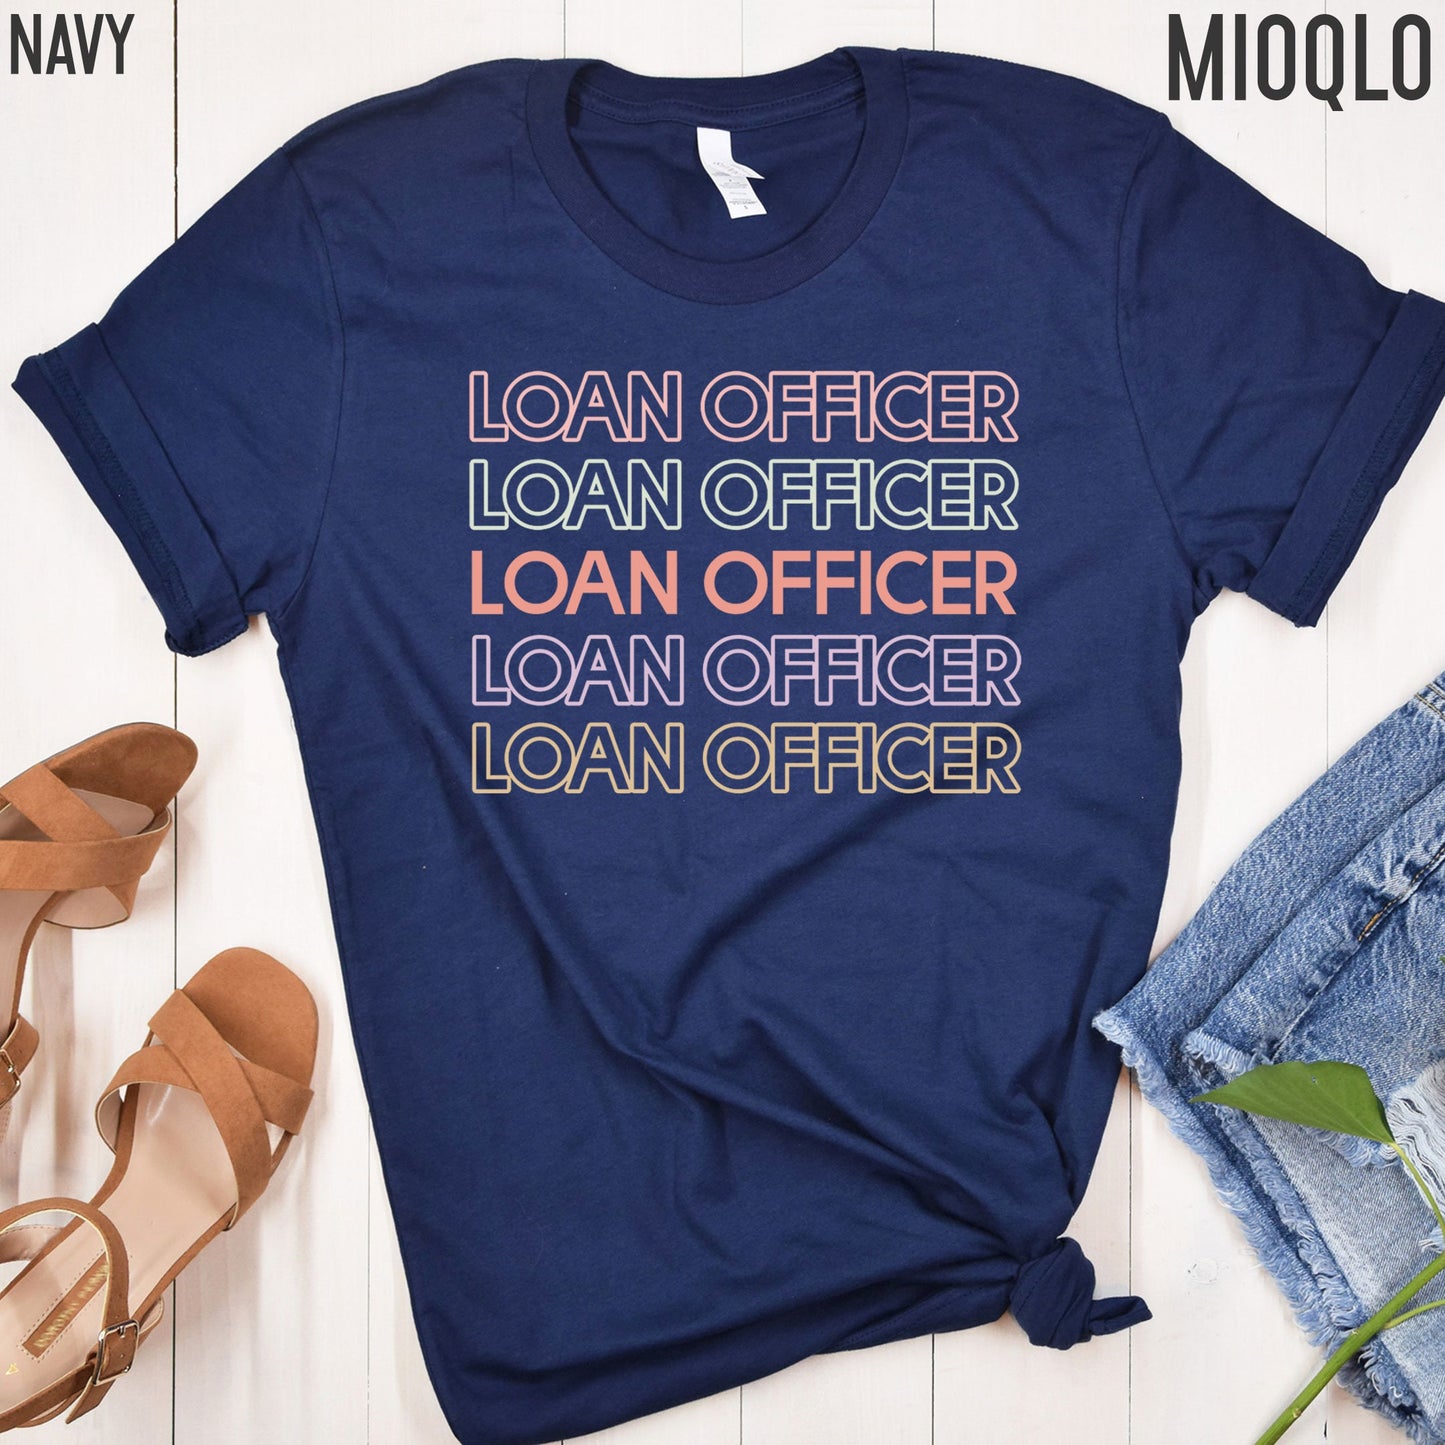 Mortgage Loan Officer, Lender Vibes T-Shirt, Real Estate Shirts for Realtors, Mortgage Lender Loan Officer Gift, Ask Me About Mortgages Tee